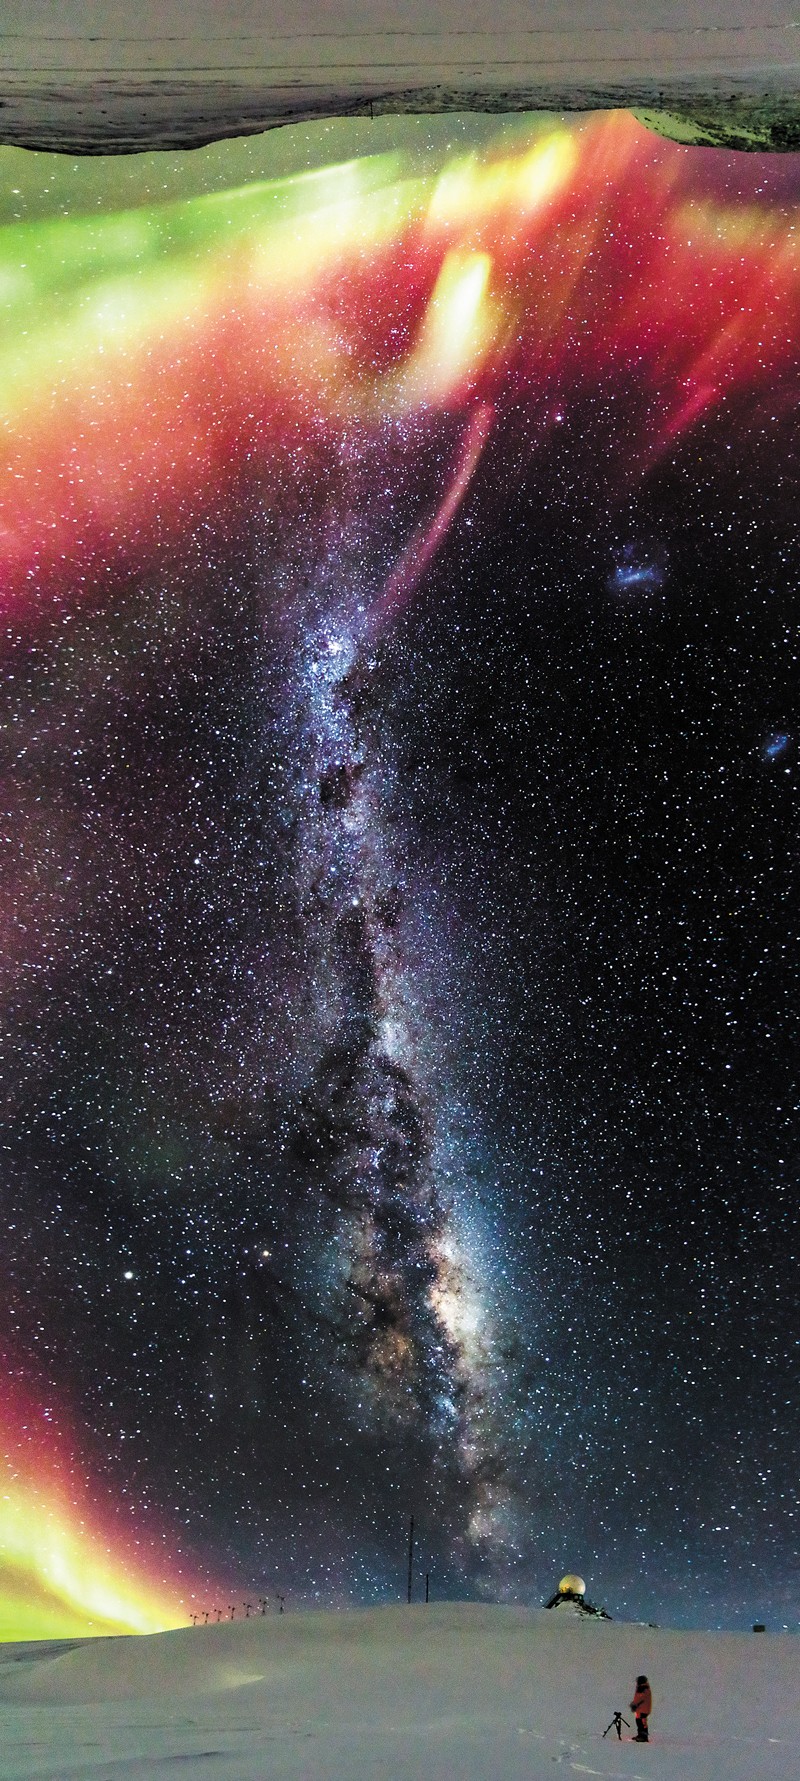 Panoramic view of an aurora and the Milky Way